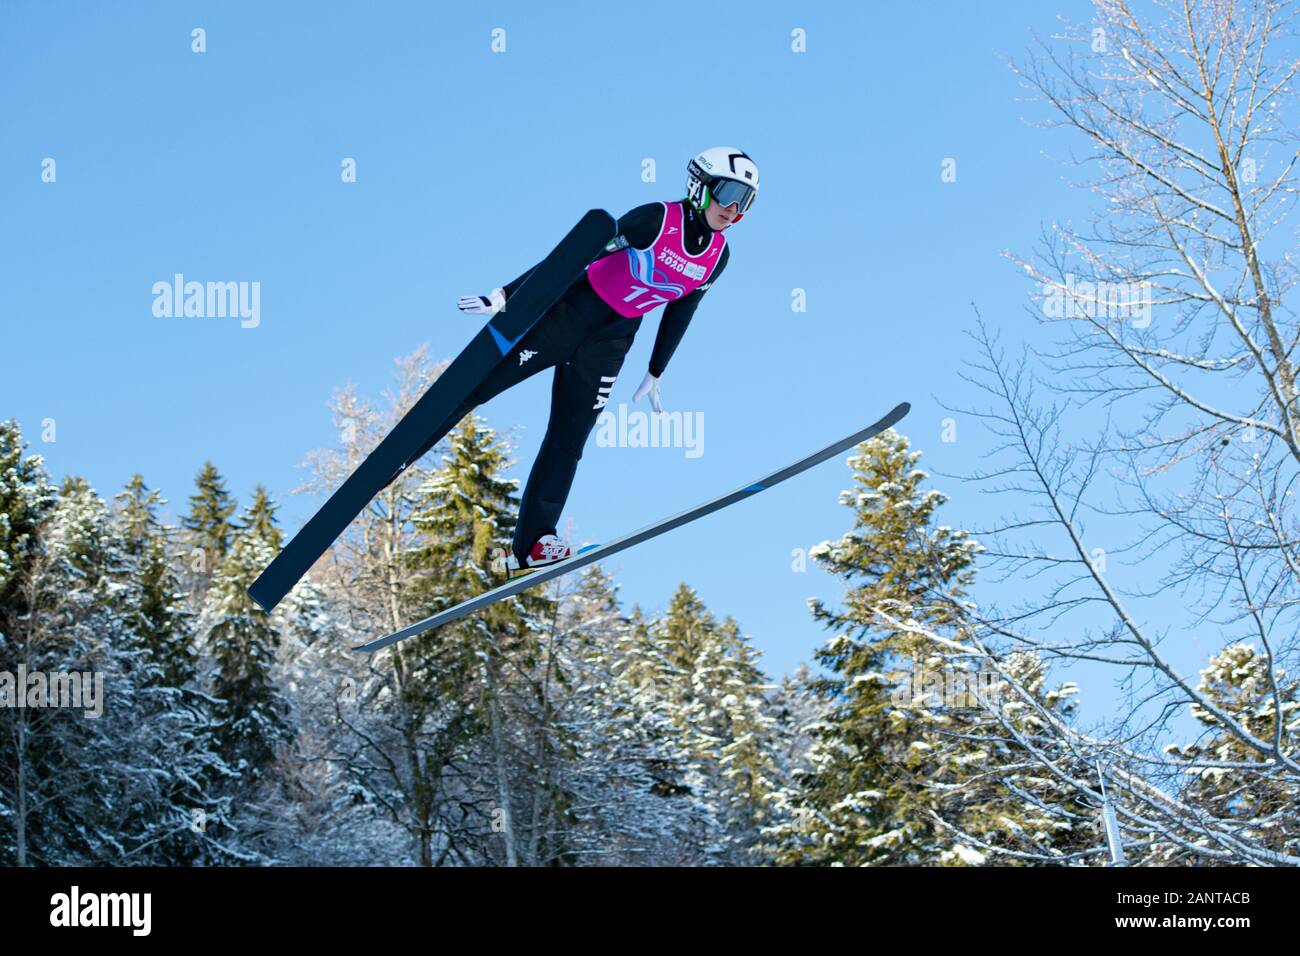 Lausanne, Switzerland. 19th, Jan 2020. MALSINER Jessica (ITA) competes in the Ski Jumping: Women's Individual Competition 1st Round during the Lausanne 2020 Youth Olympic Games at Les Tuffes Nordic Centre on Sunday, 19 January 2020. Lausanne, Switzerland. Credit: Taka G Wu/Alamy Live News Stock Photo